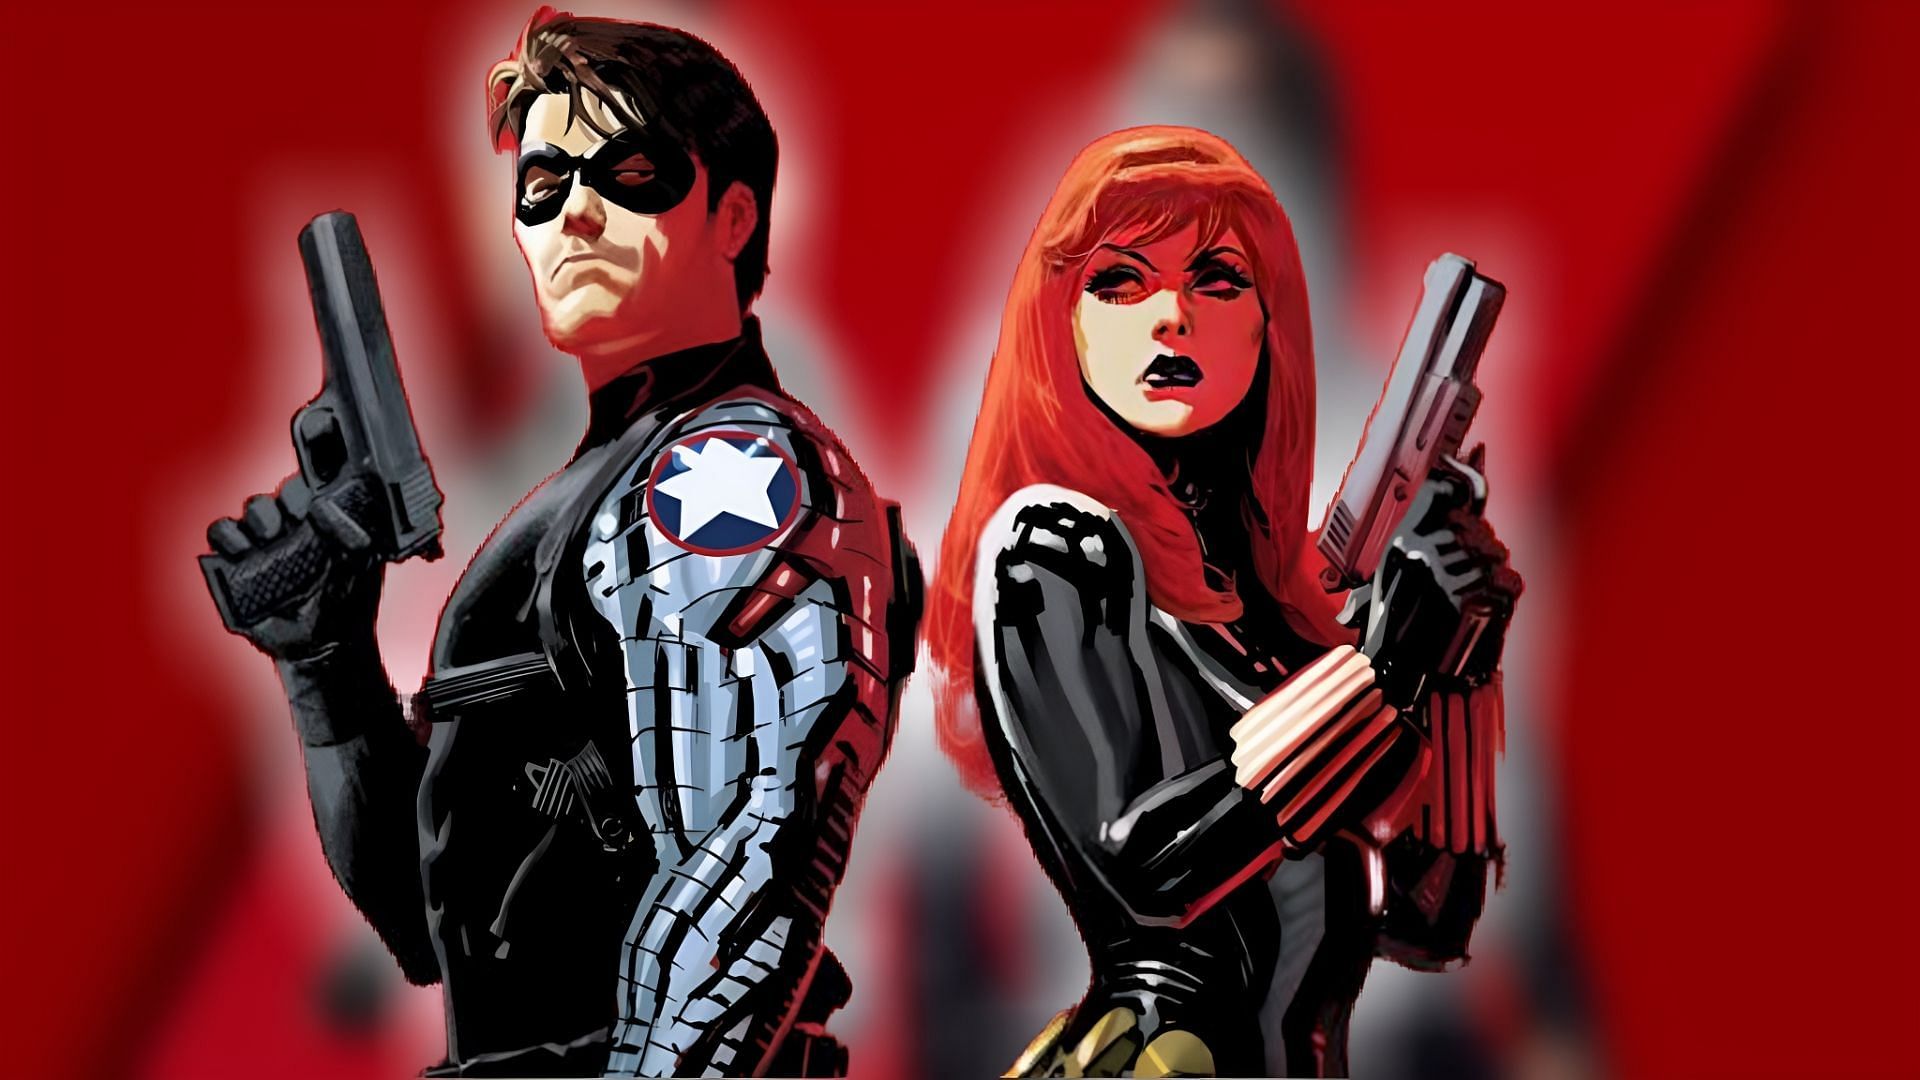 Black Widow and Bucky have had a romantic relationship in some storylines. (Image Via Sportskeeda)